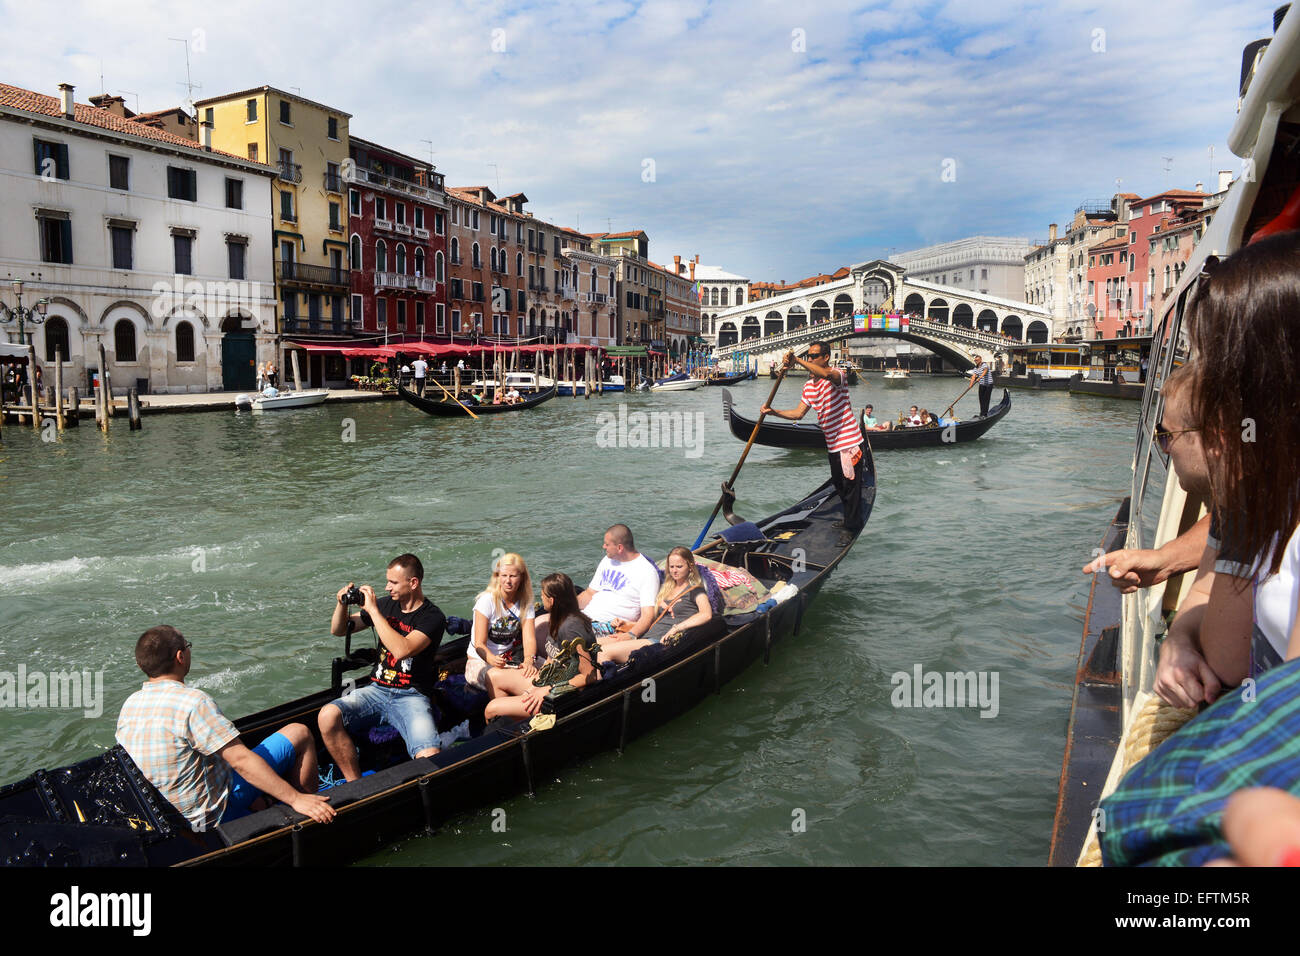 Tourists ride a Gondola on the Grand Canal, Venice, Italy Stock Photo